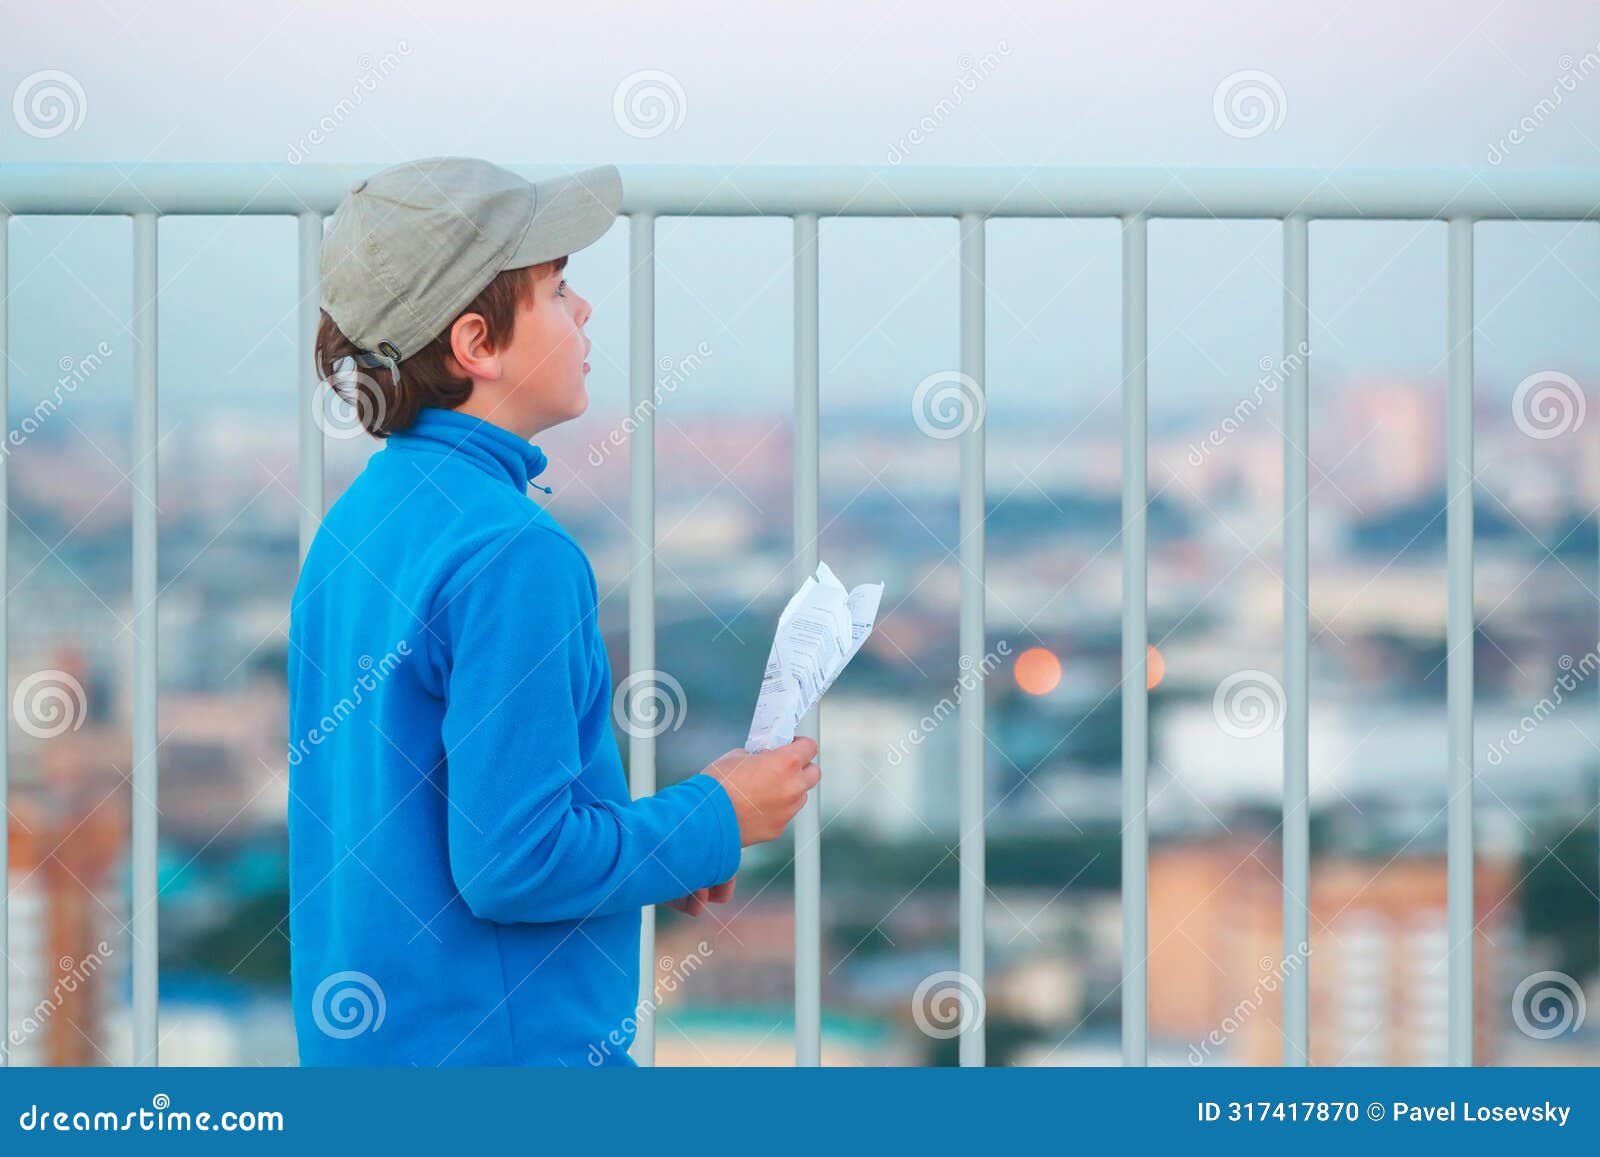 boy stands on roof of multistory building with